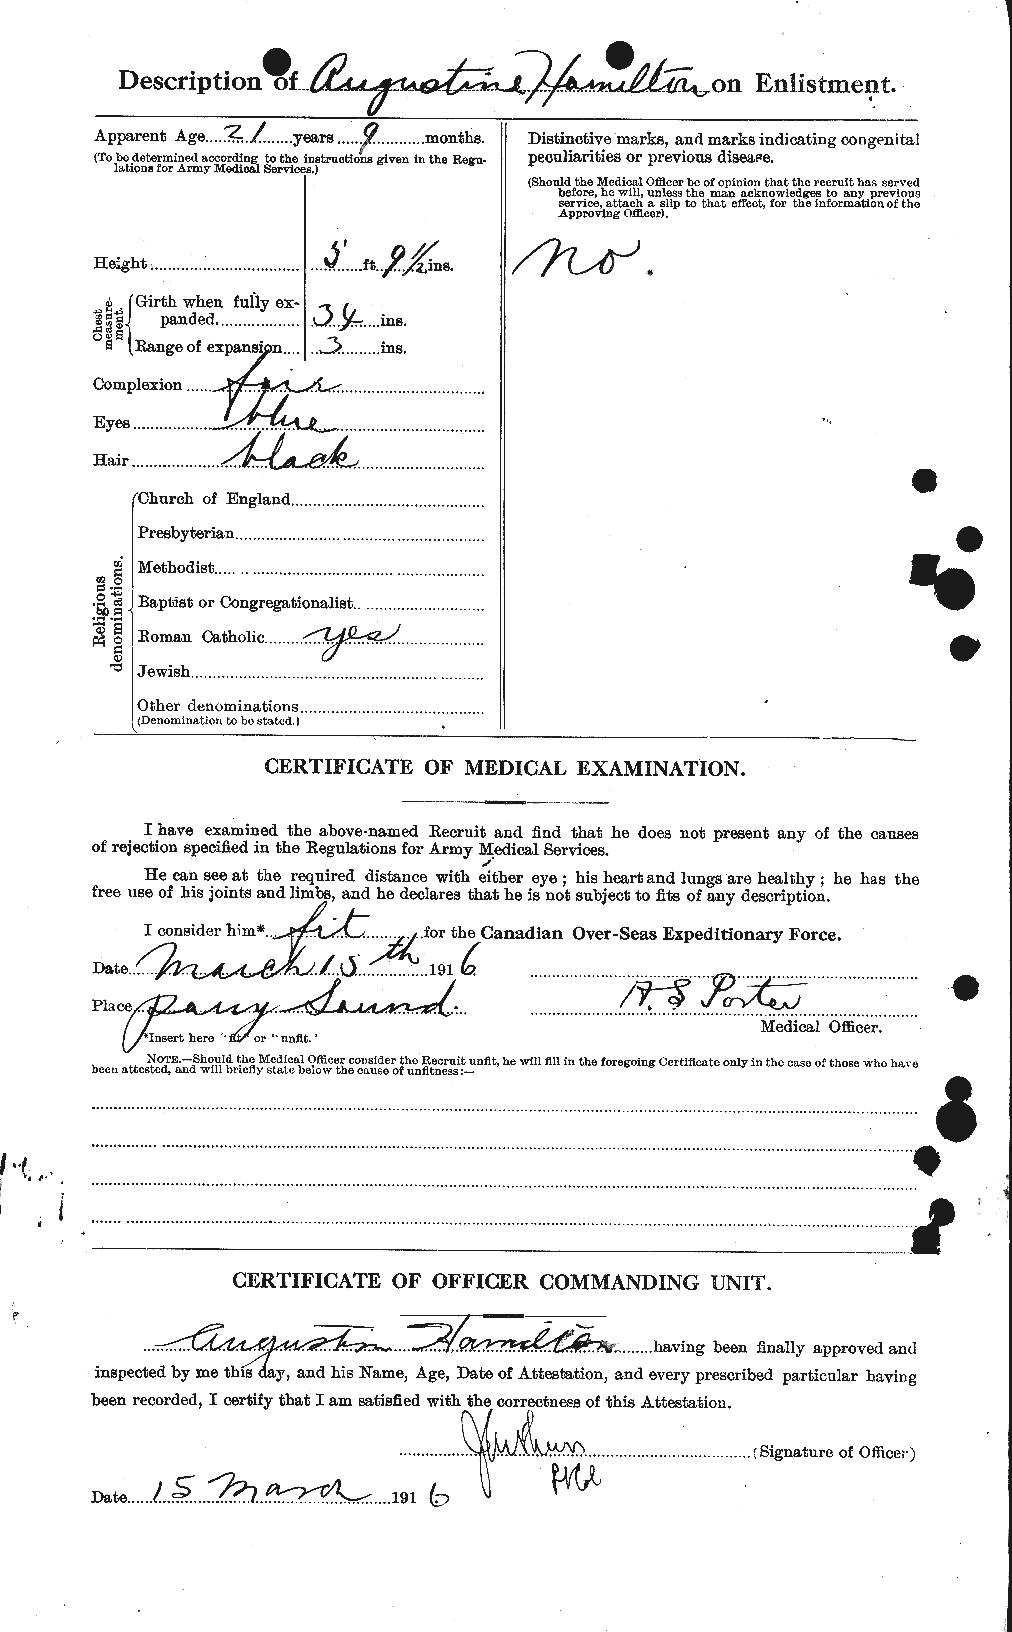 Personnel Records of the First World War - CEF 375260b